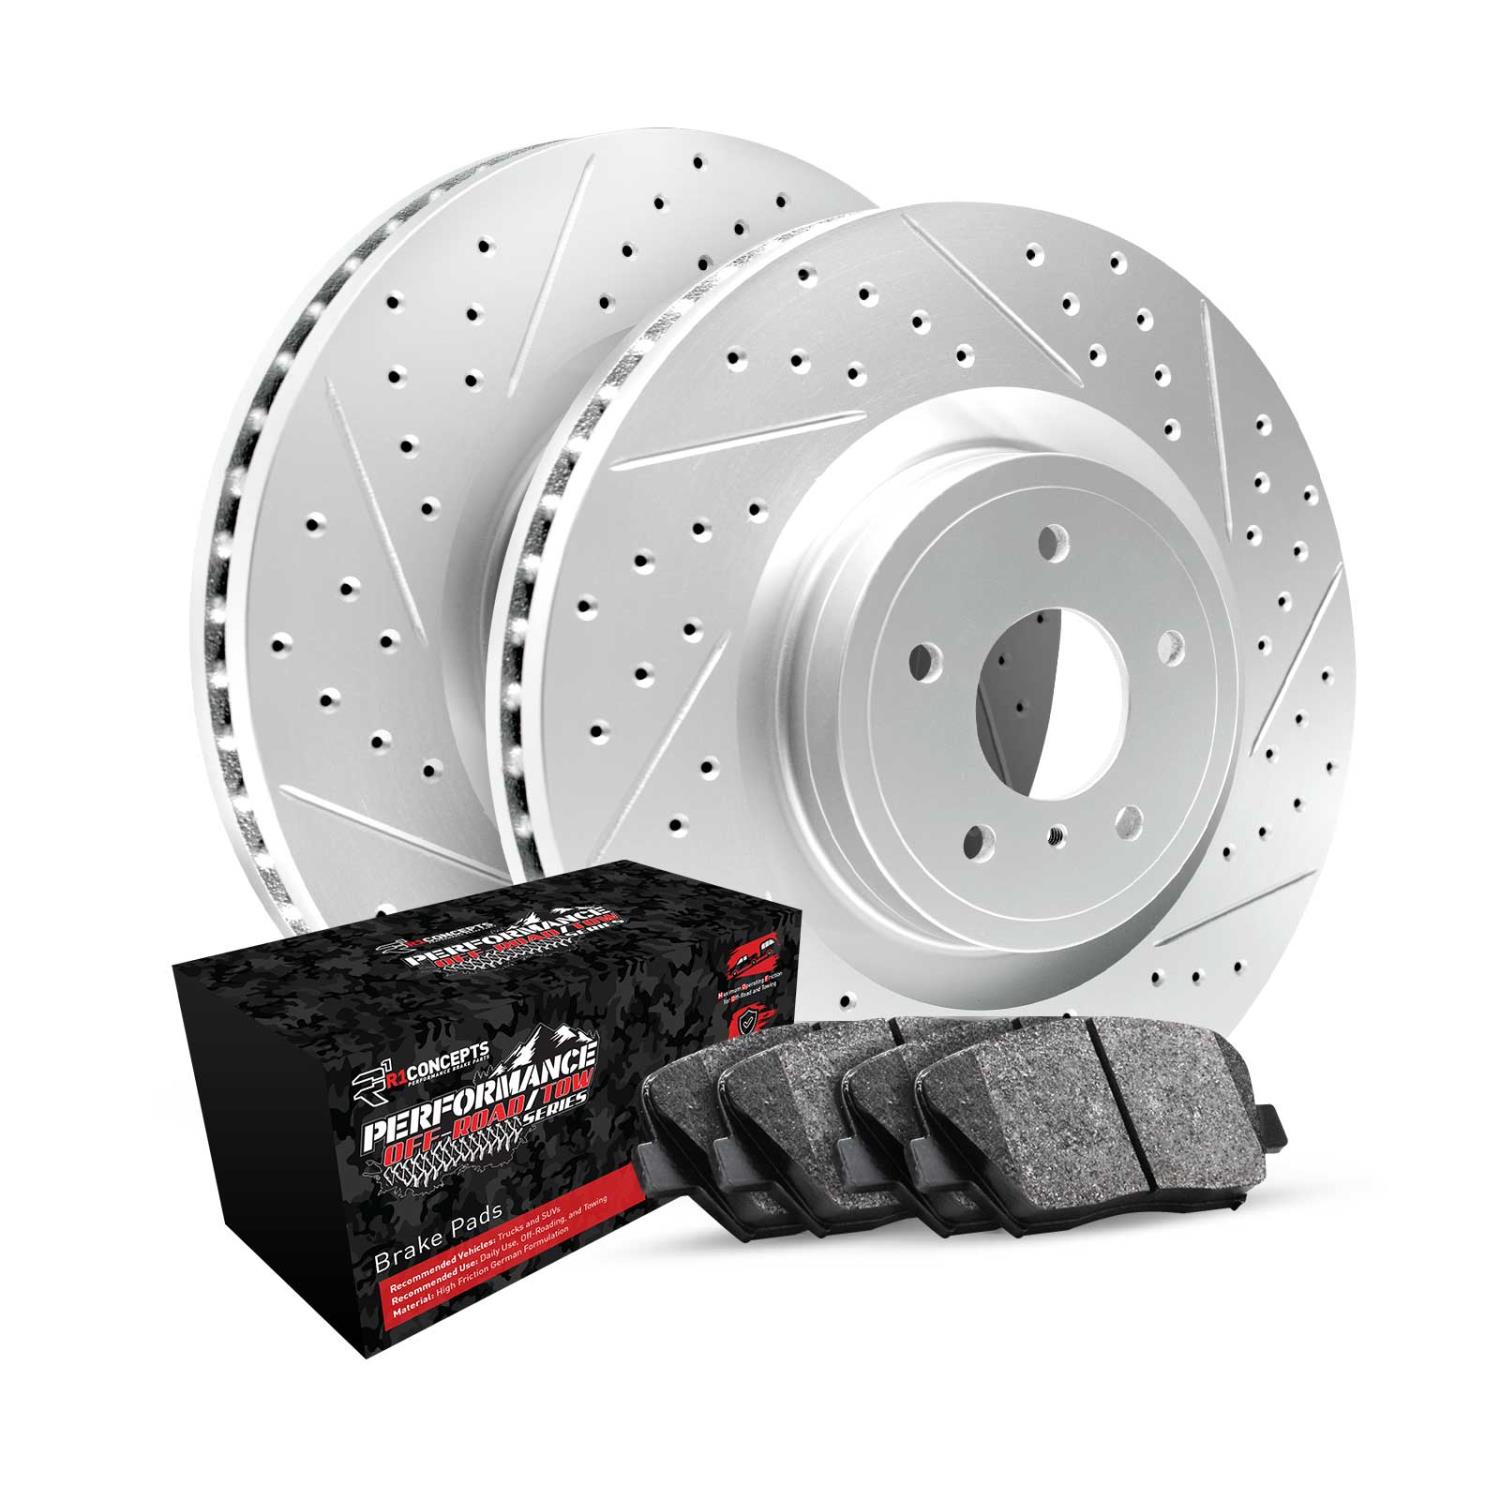 GEO-Carbon Drilled & Slotted Brake Rotor Set w/Performance Off-Road/Tow Pads, Fits Select Ford/Lincoln/Mercury/Mazda